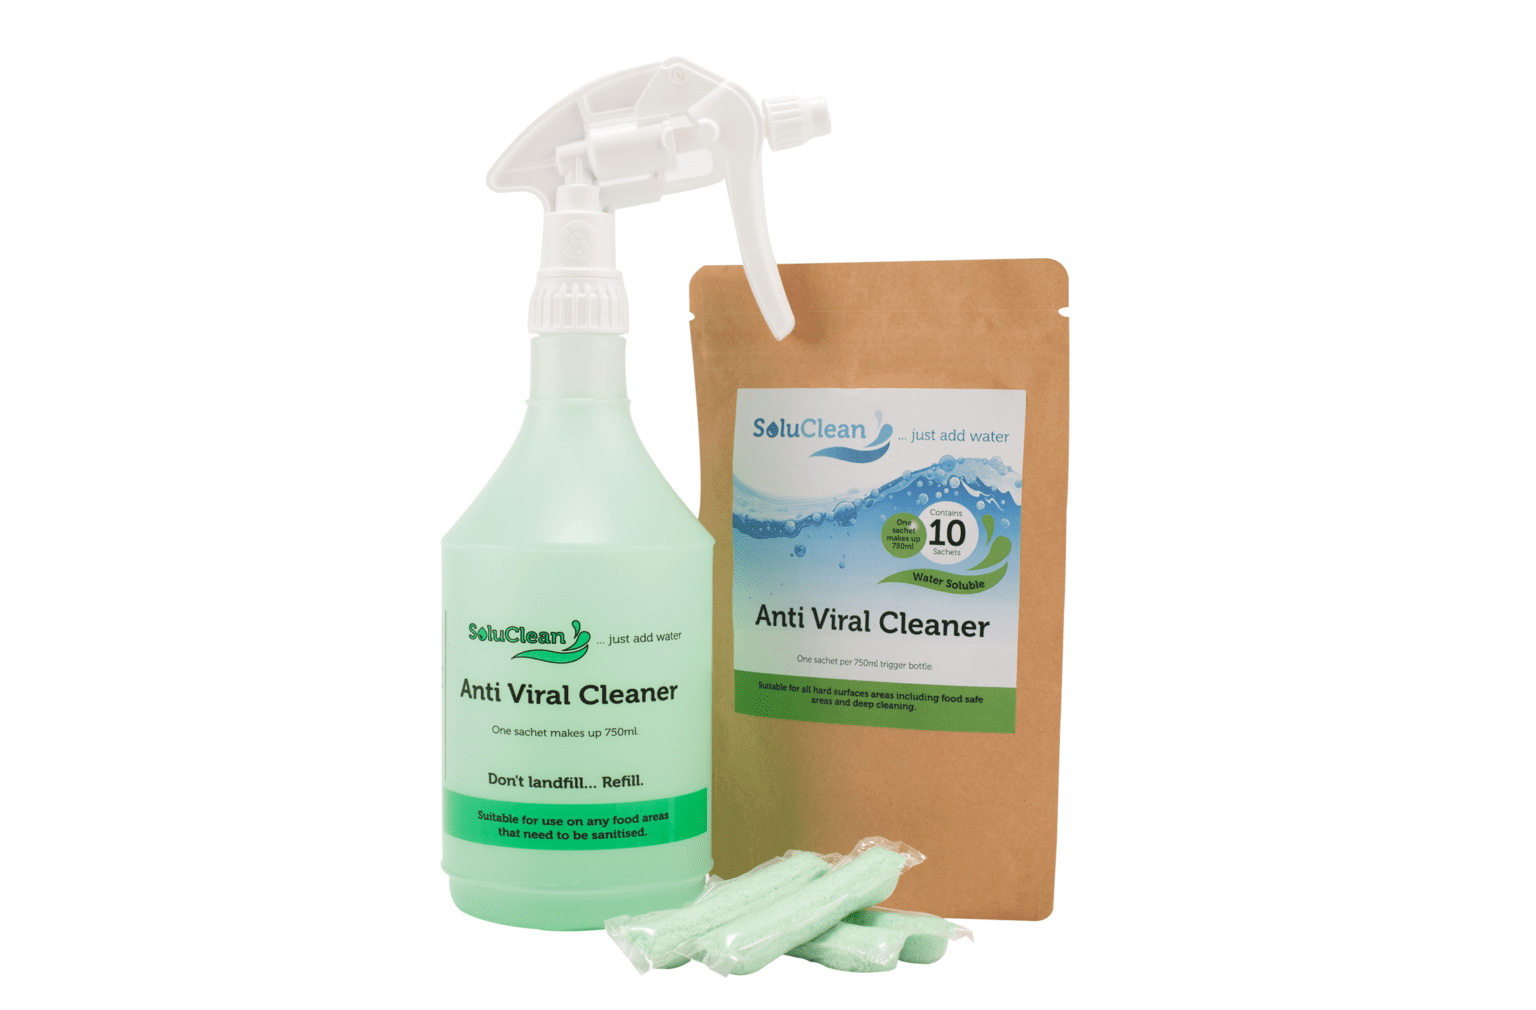 Specialising In SoluClean Anti Viral Cleaner 2&#215;10 Sachets For Your Business